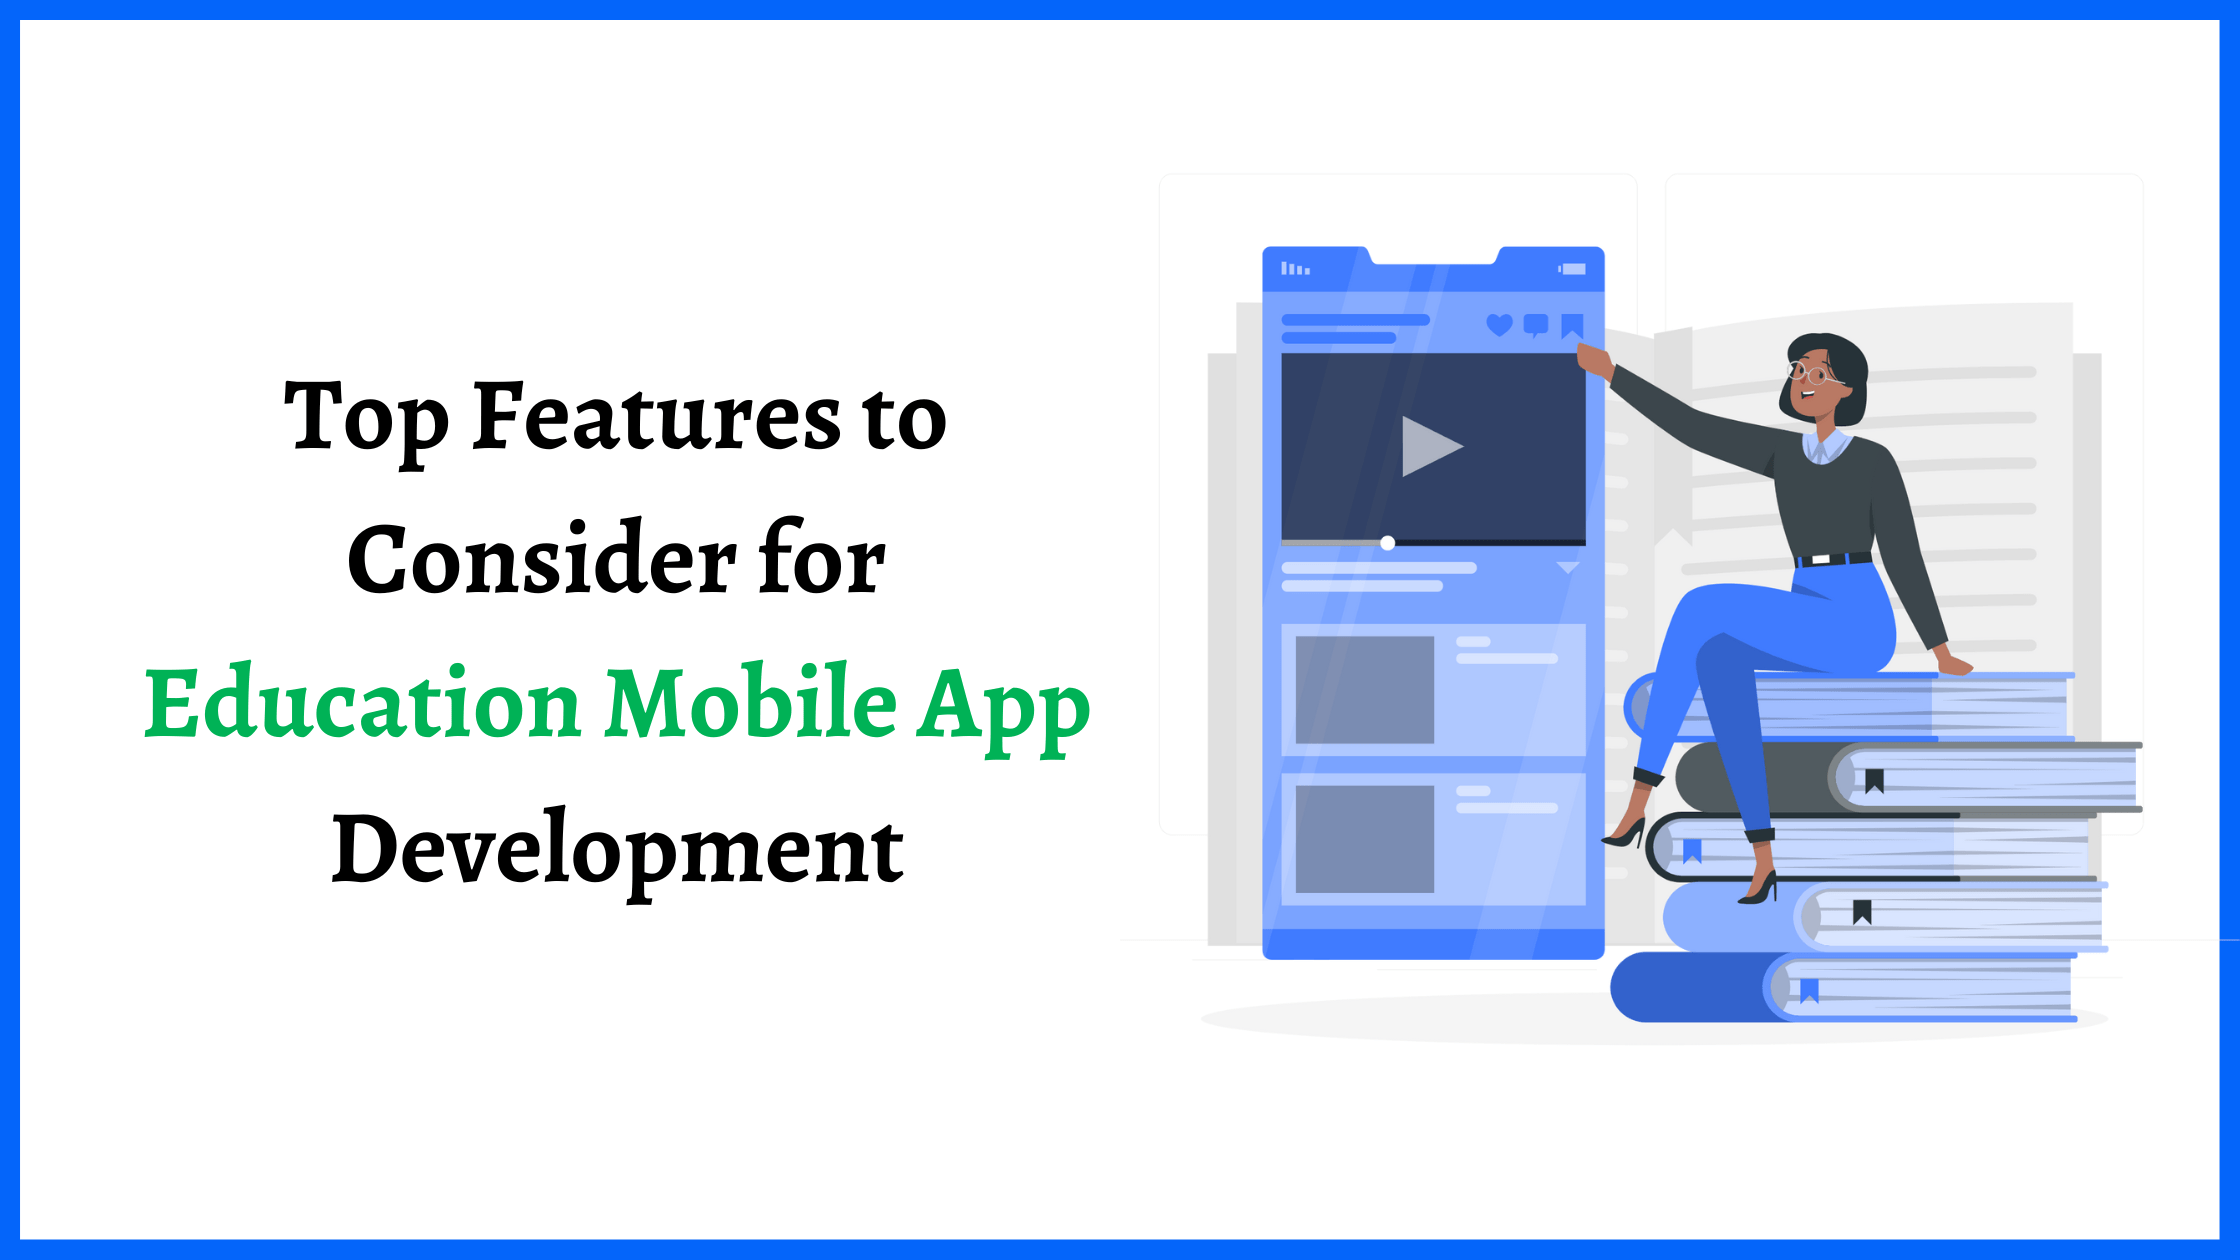 Top 10 Features to Consider for Education Mobile App Development